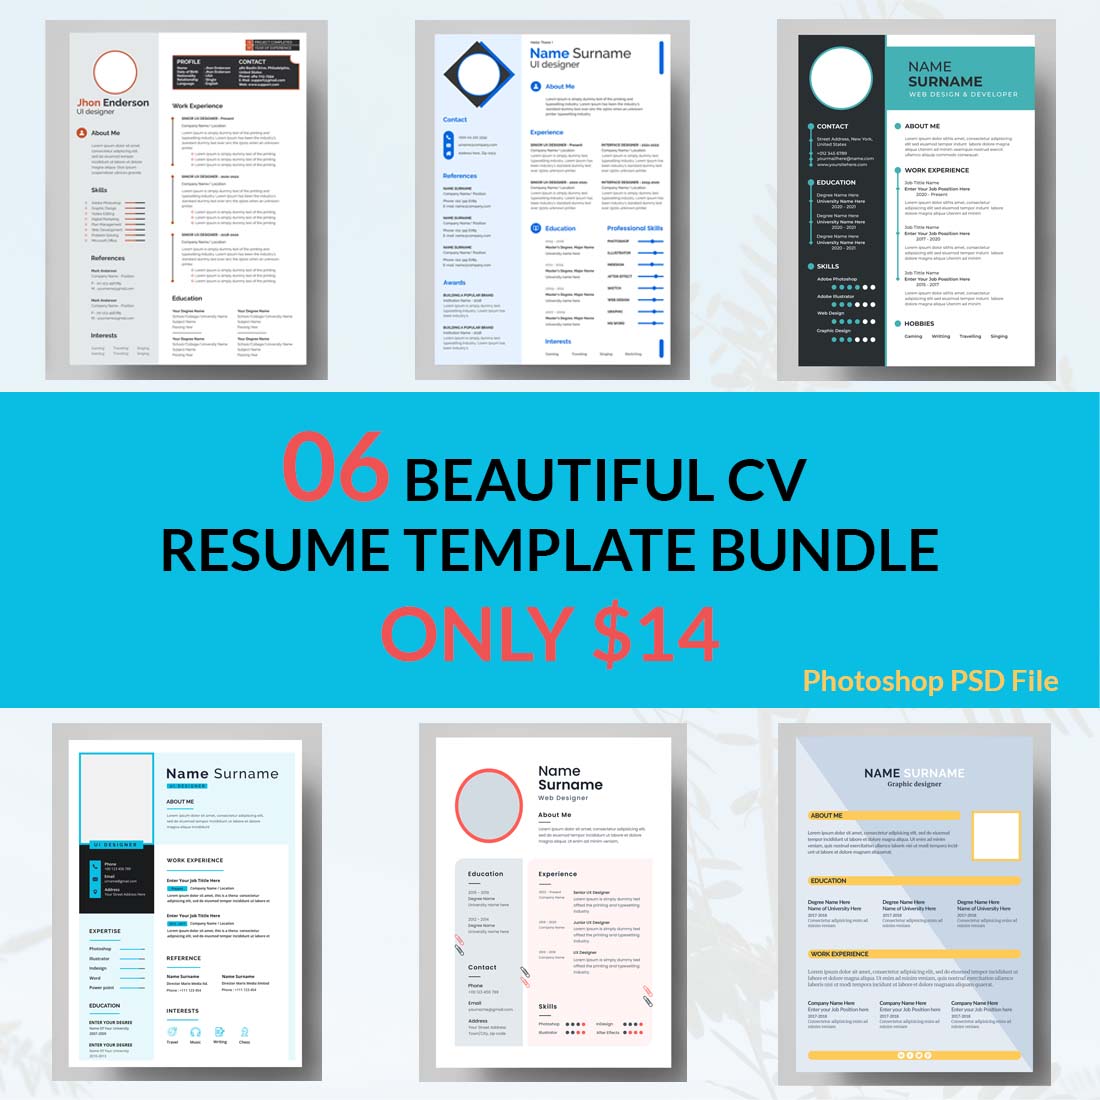 Bunch of different resume templates on a blue background.